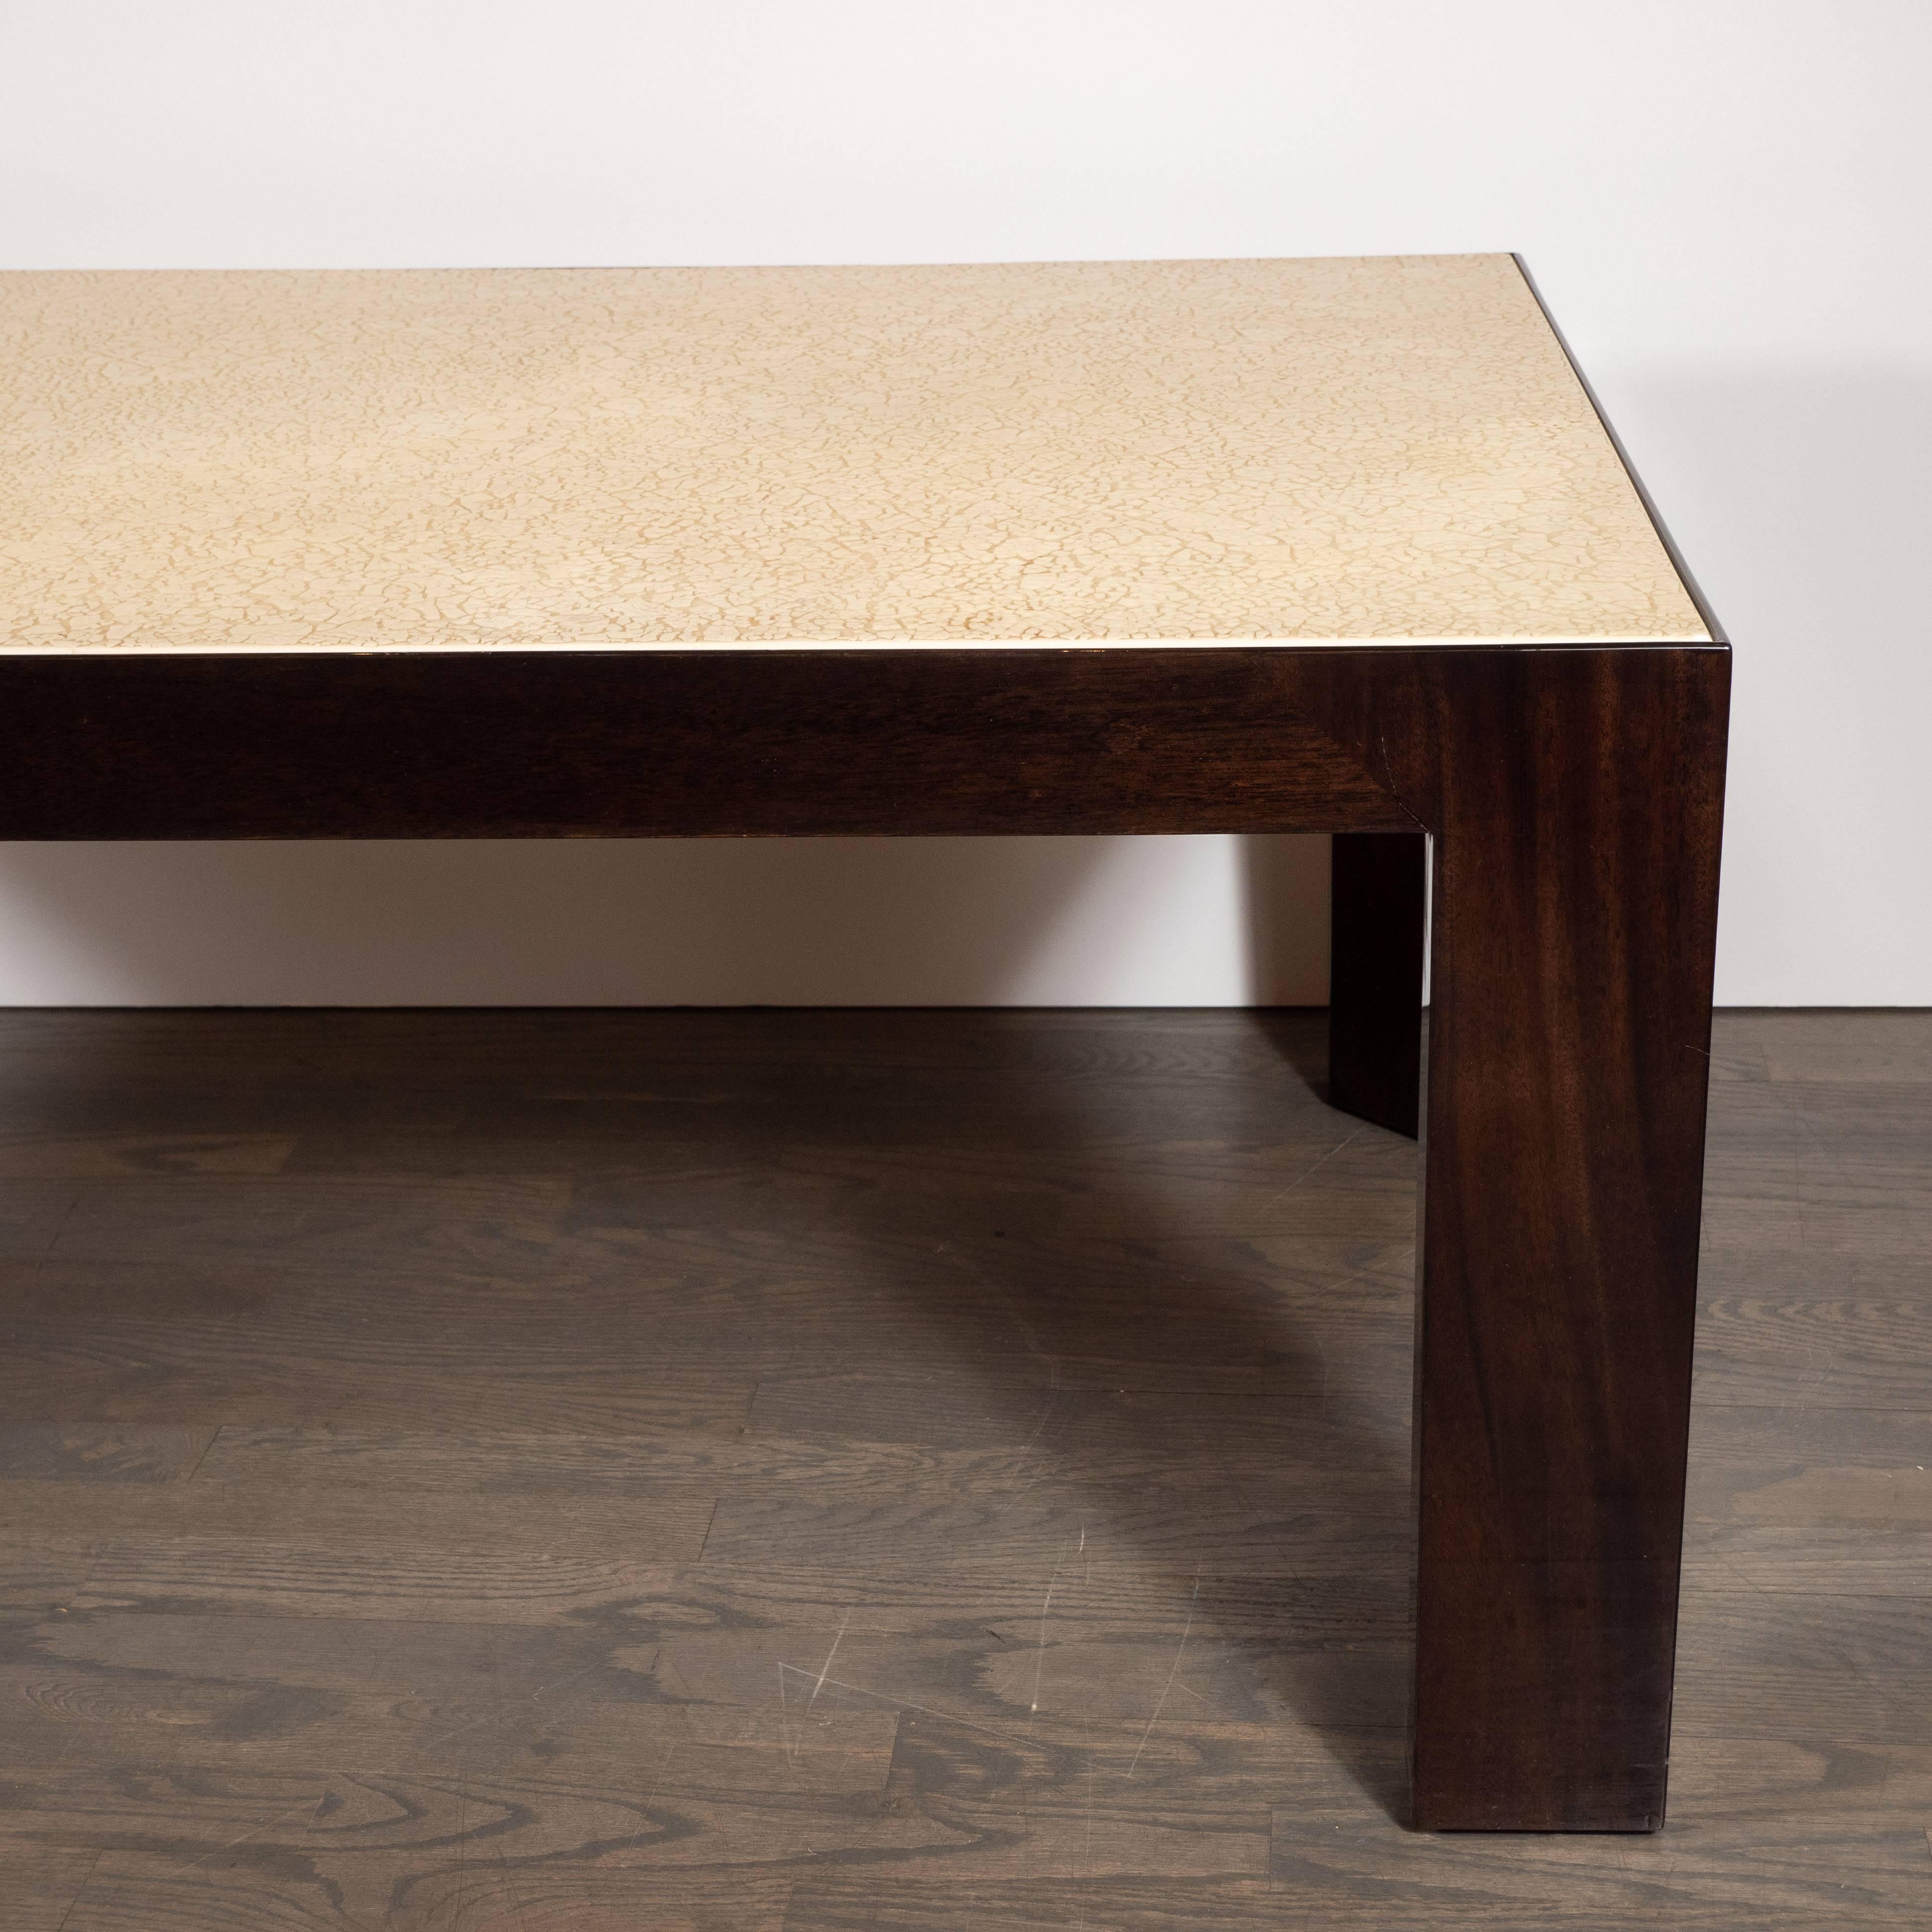 This sophisticated cocktail table was realized in the United States, circa 1980. It features a Parson style body with rectangular legs and apron composed of hand rubbed walnut, as well as a resin craqueleur top. The top, executed in a cream hue,